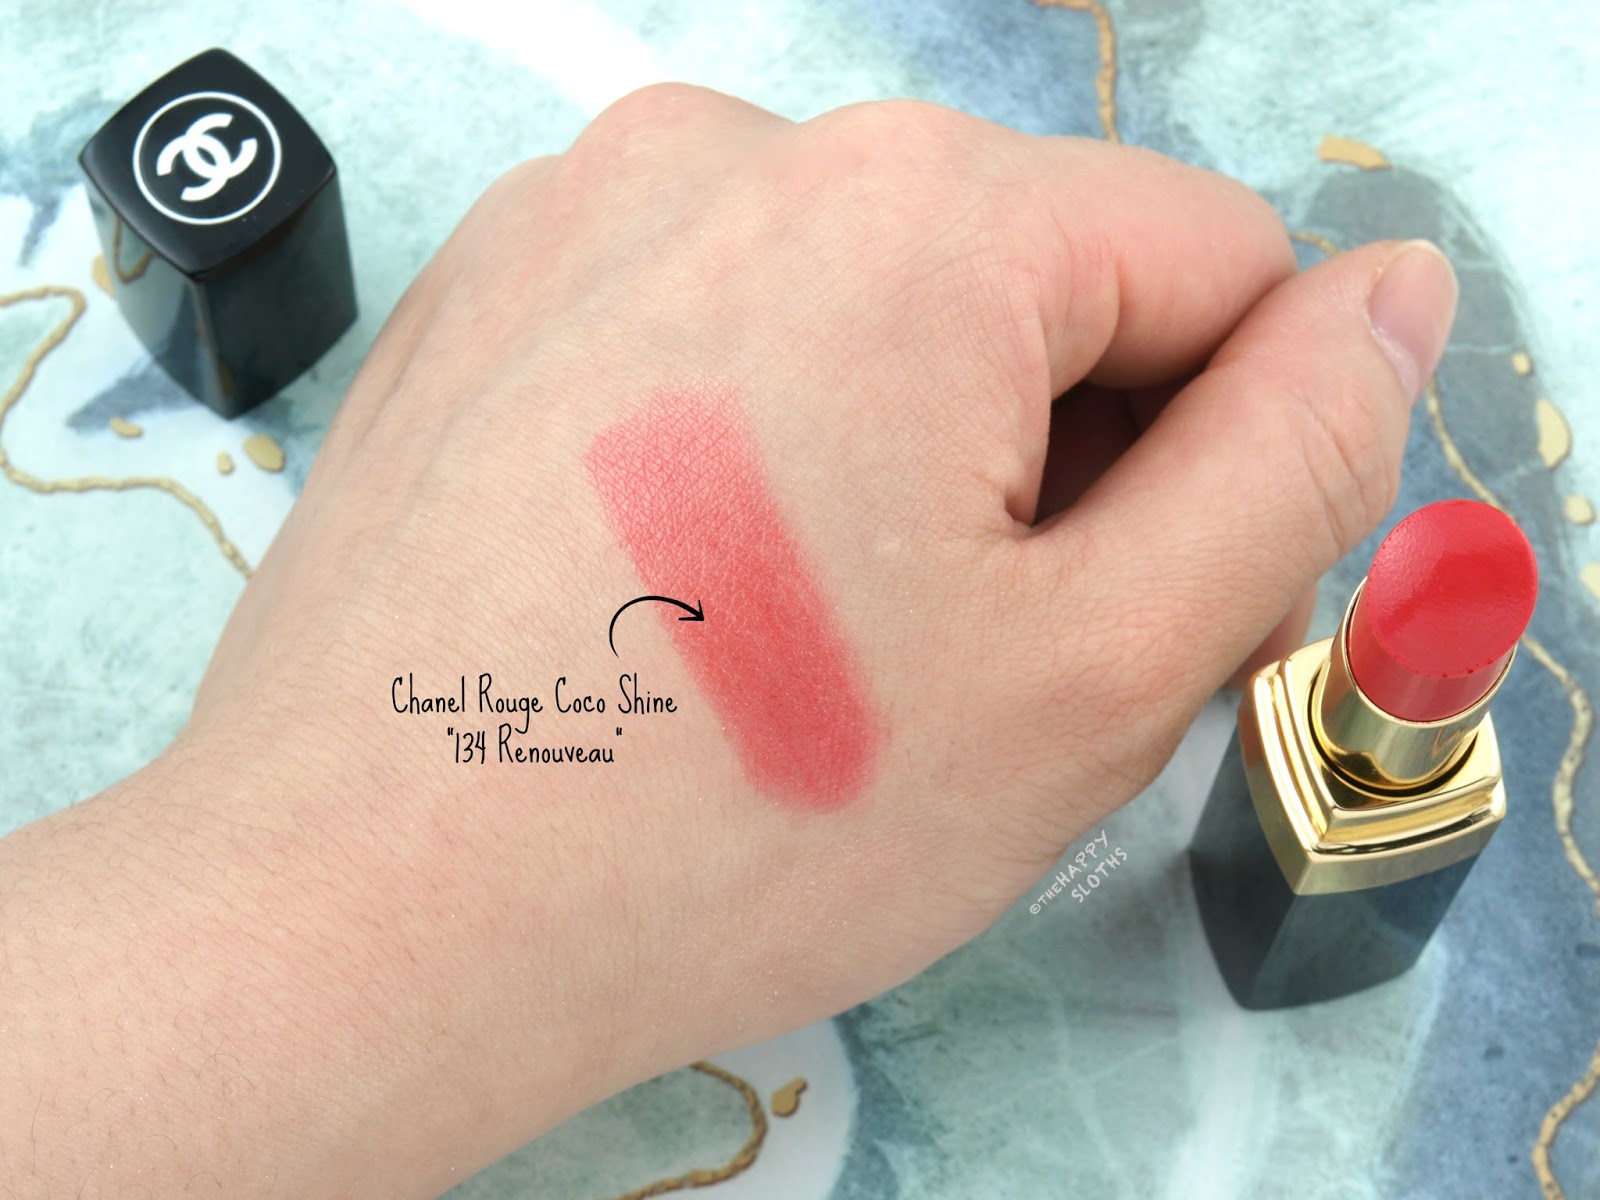 Chanel | Spring 2018 Dernières Neiges de Chanel Collection | Rouge Coco Shine in "134 Renouveau": Review and Swatches